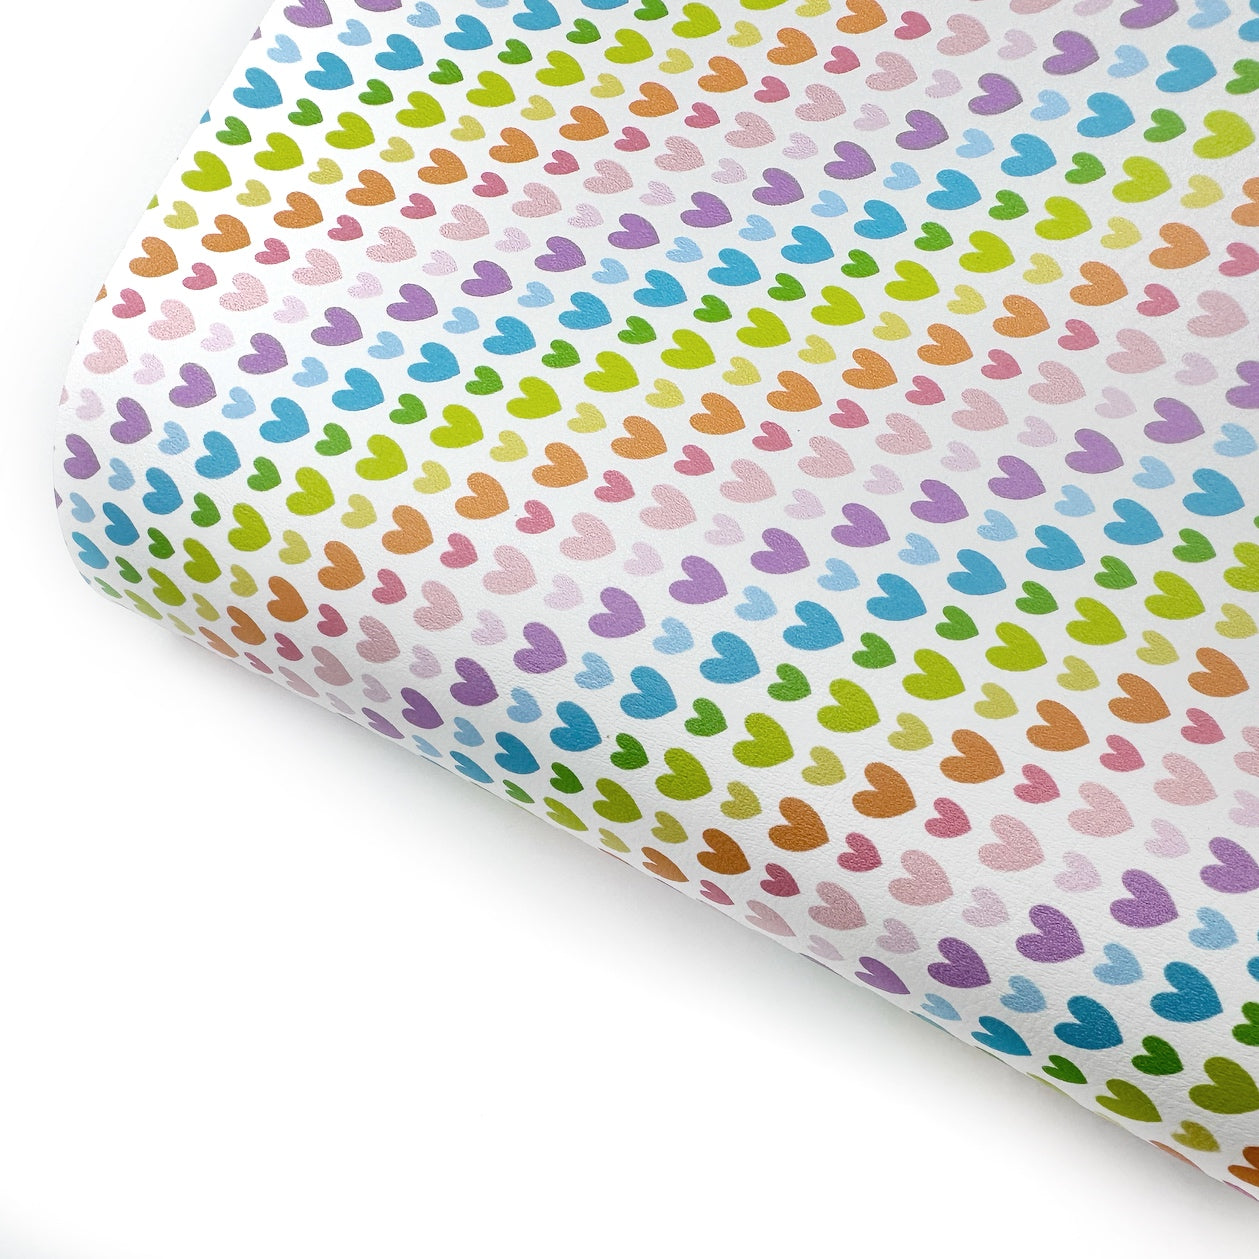 Rainbow Hearts Mix up Premium Faux Leather Fabric Sheets